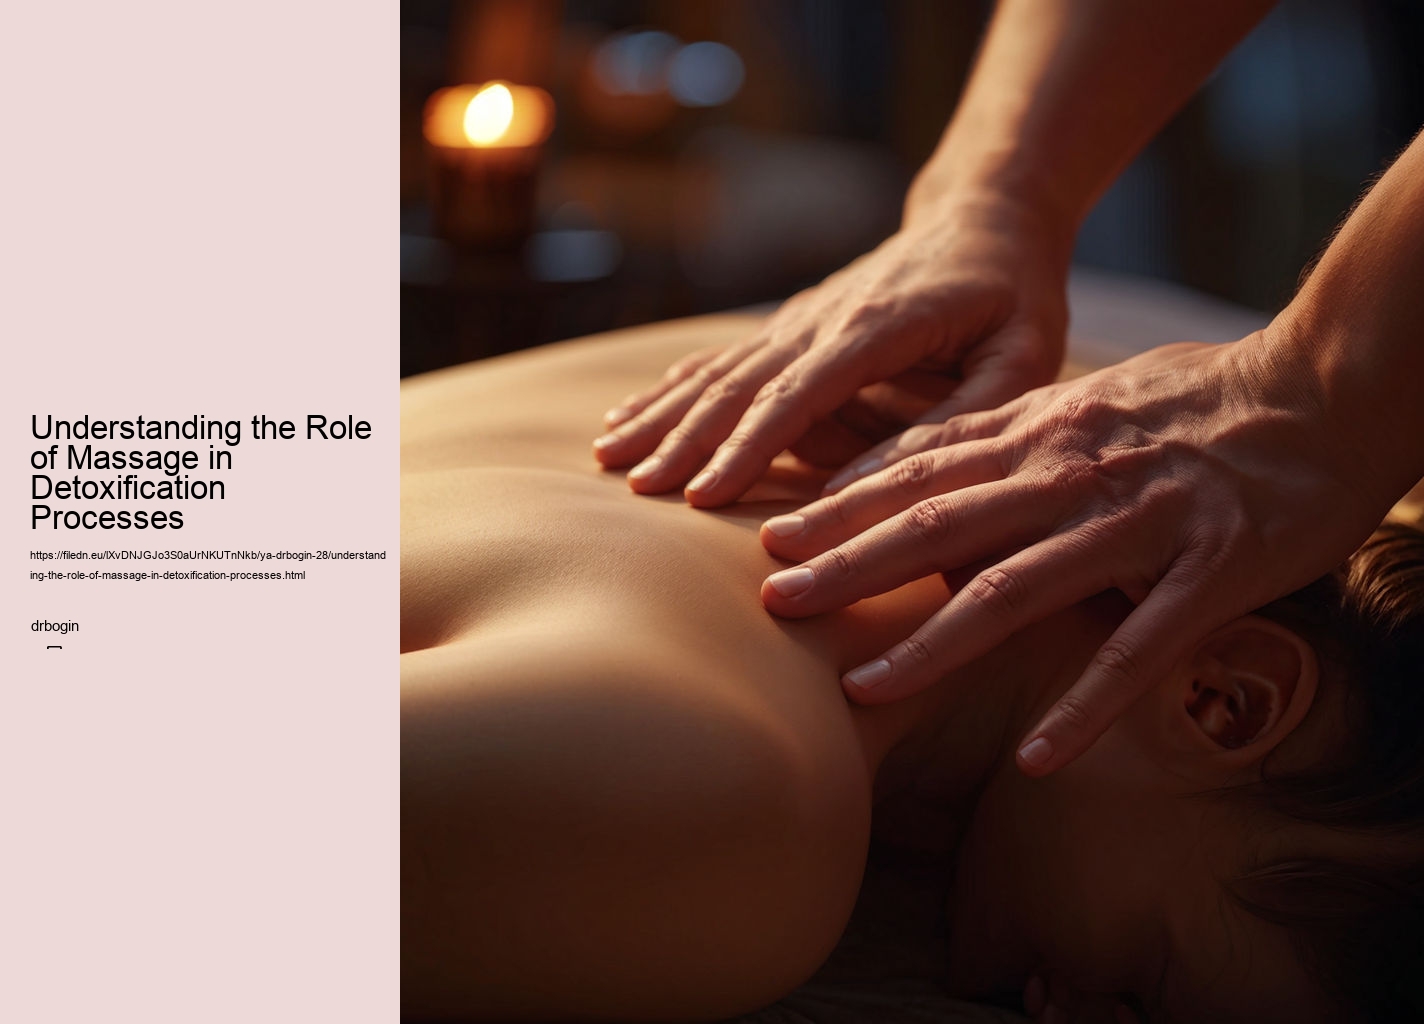 Understanding the Role of Massage in Detoxification Processes